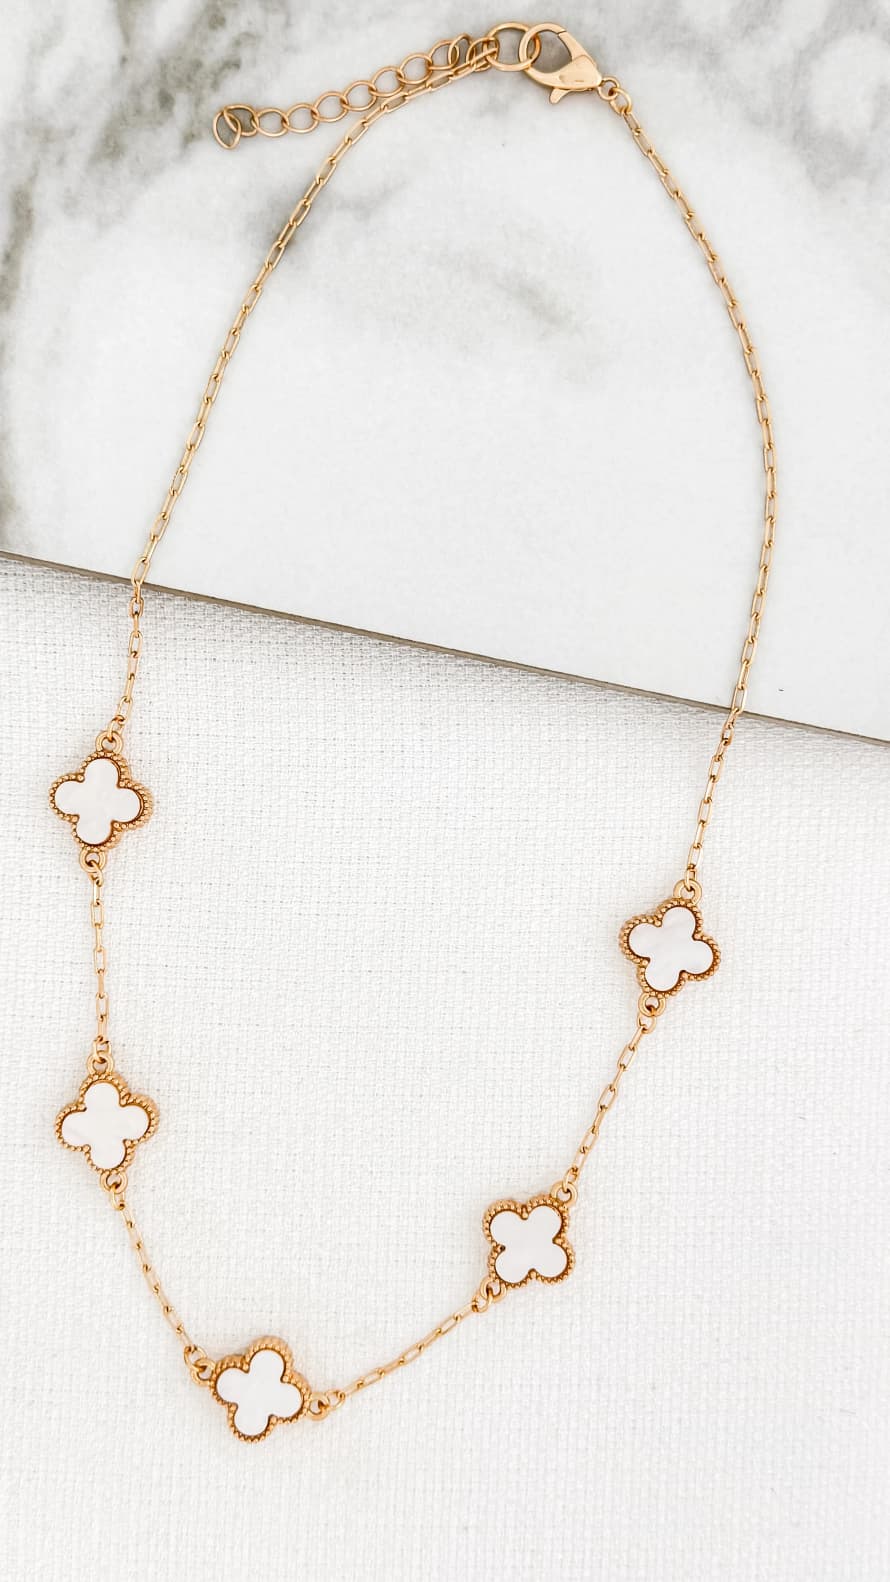 Envy Short Gold Necklace with 5 White Fleurs